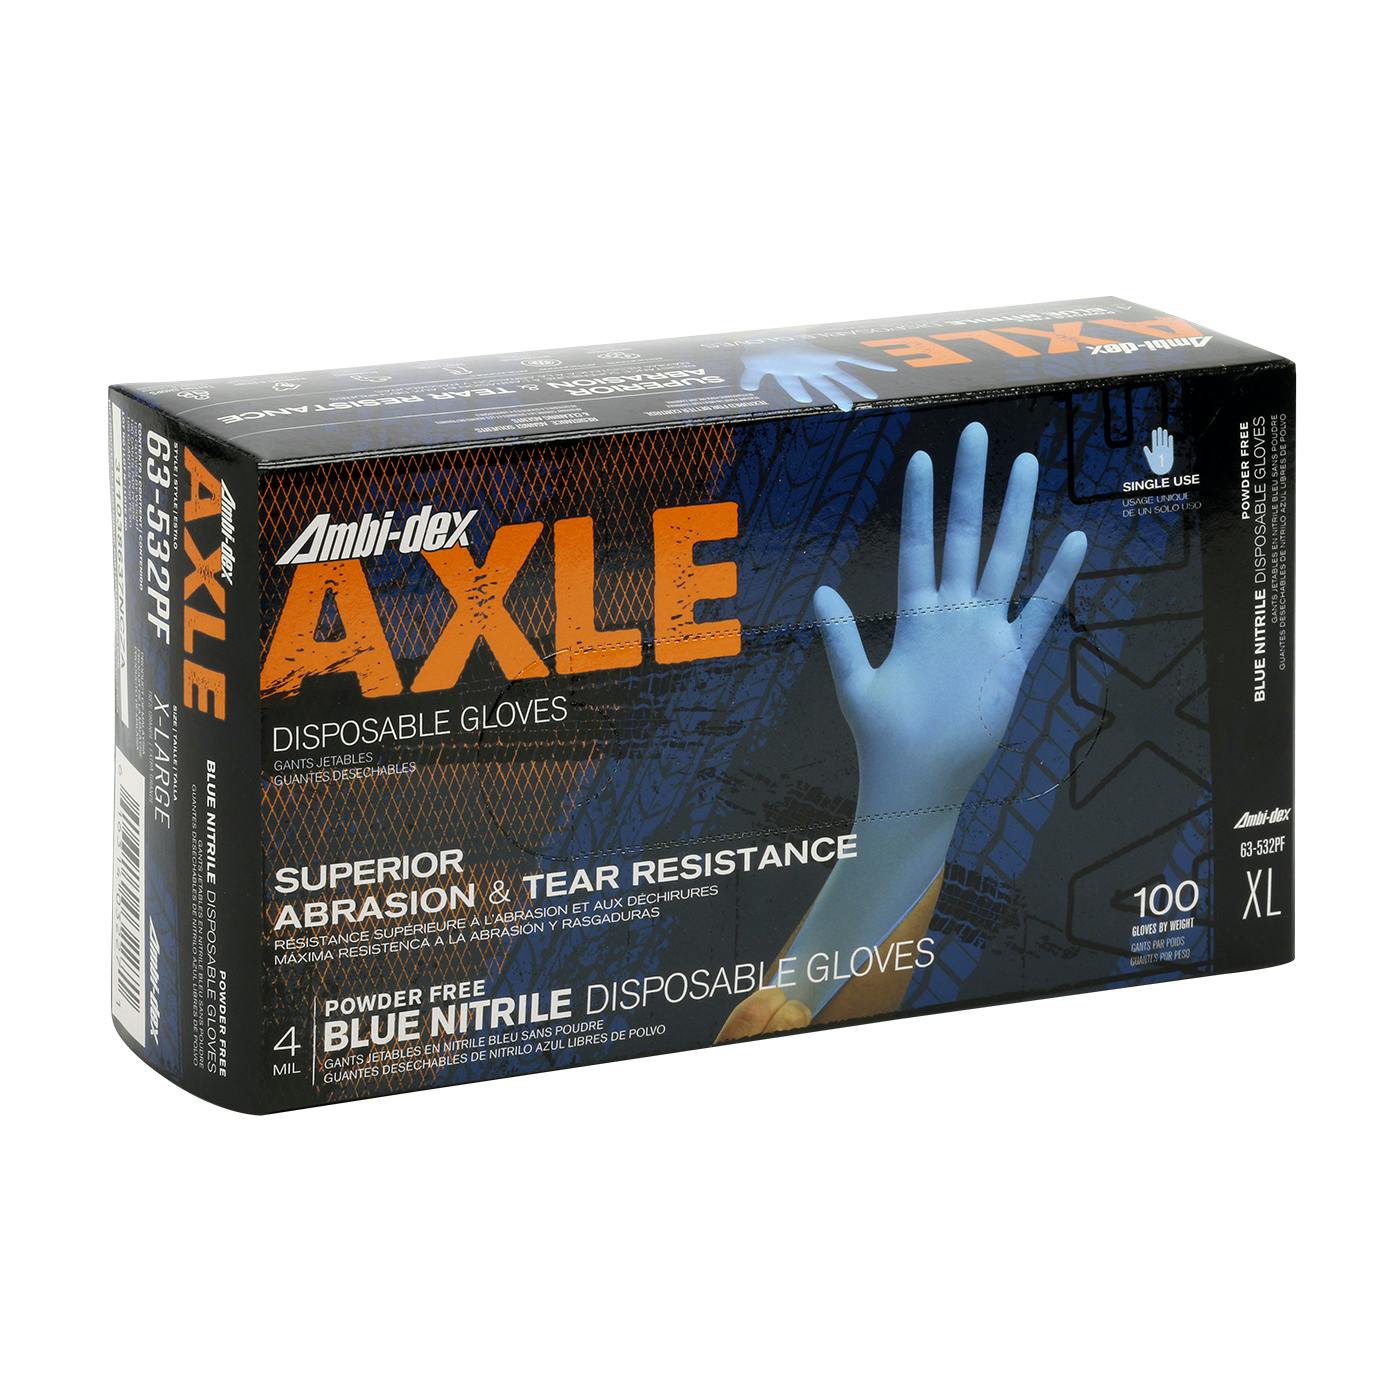 Ambi-dex® Axle Disposable Nitrile Glove, Powder Free with Textured Grip - 4 mil (63-532PF)